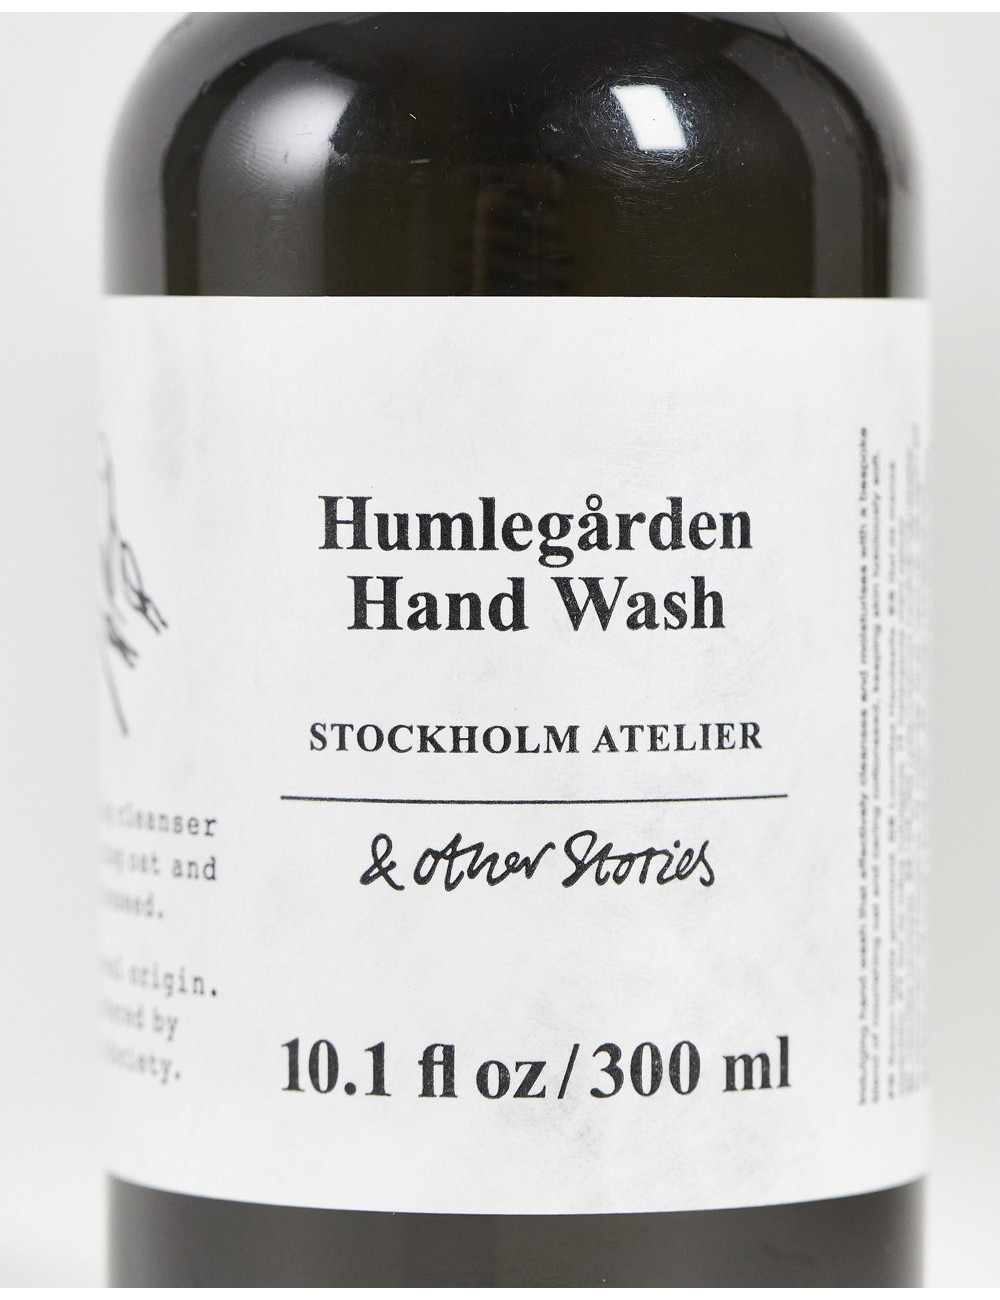 & Other Stories hand wash...